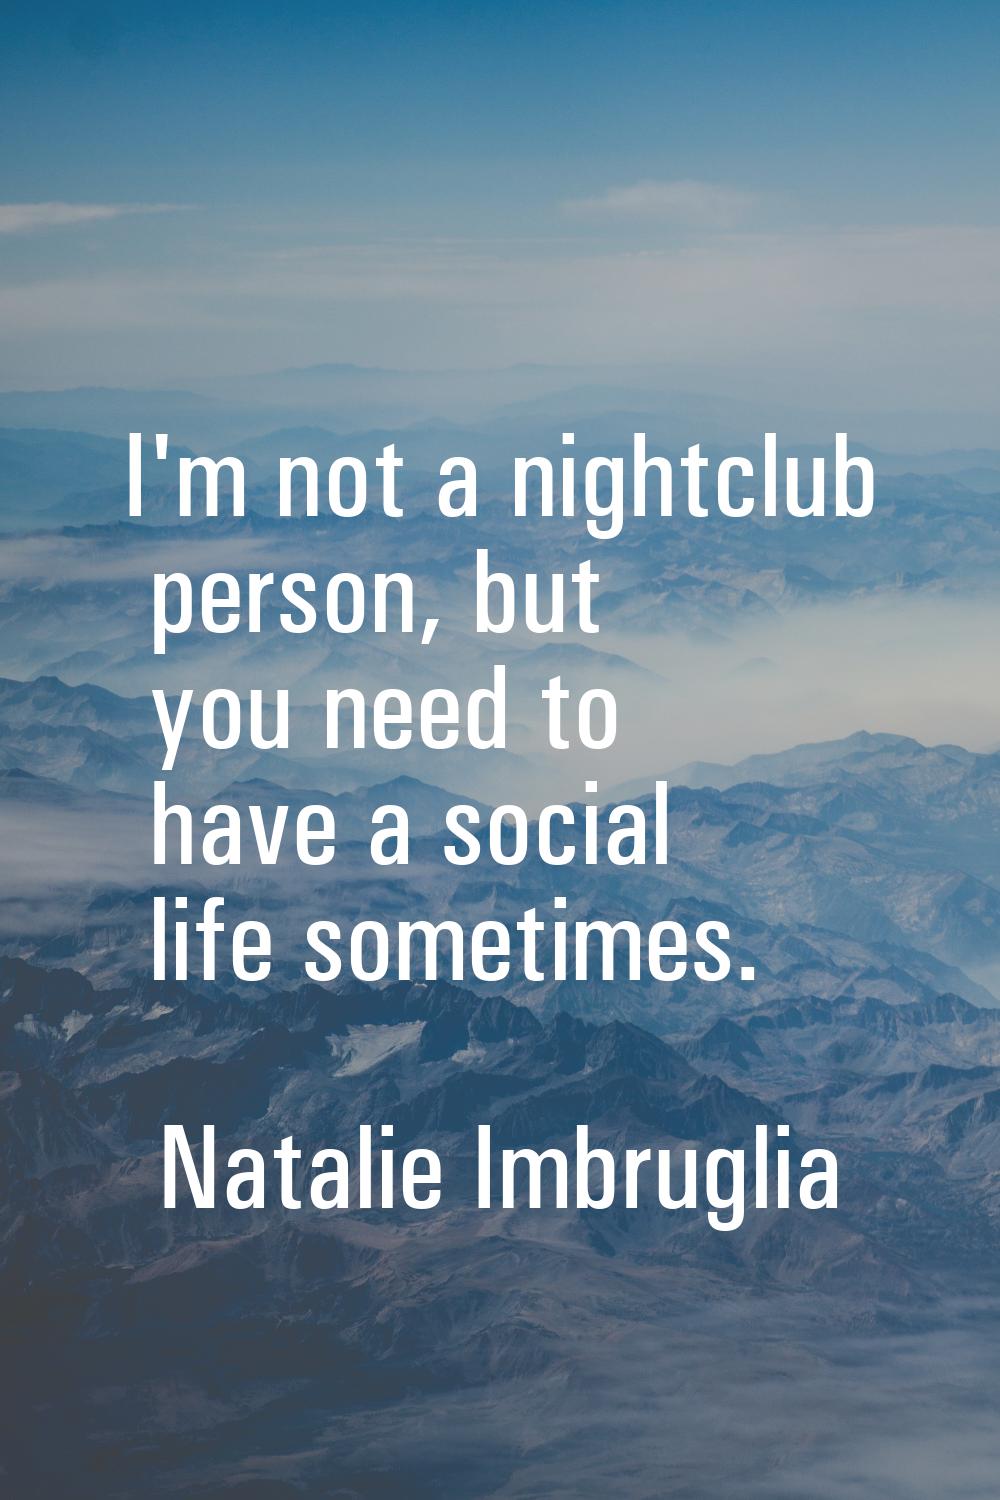 I'm not a nightclub person, but you need to have a social life sometimes.